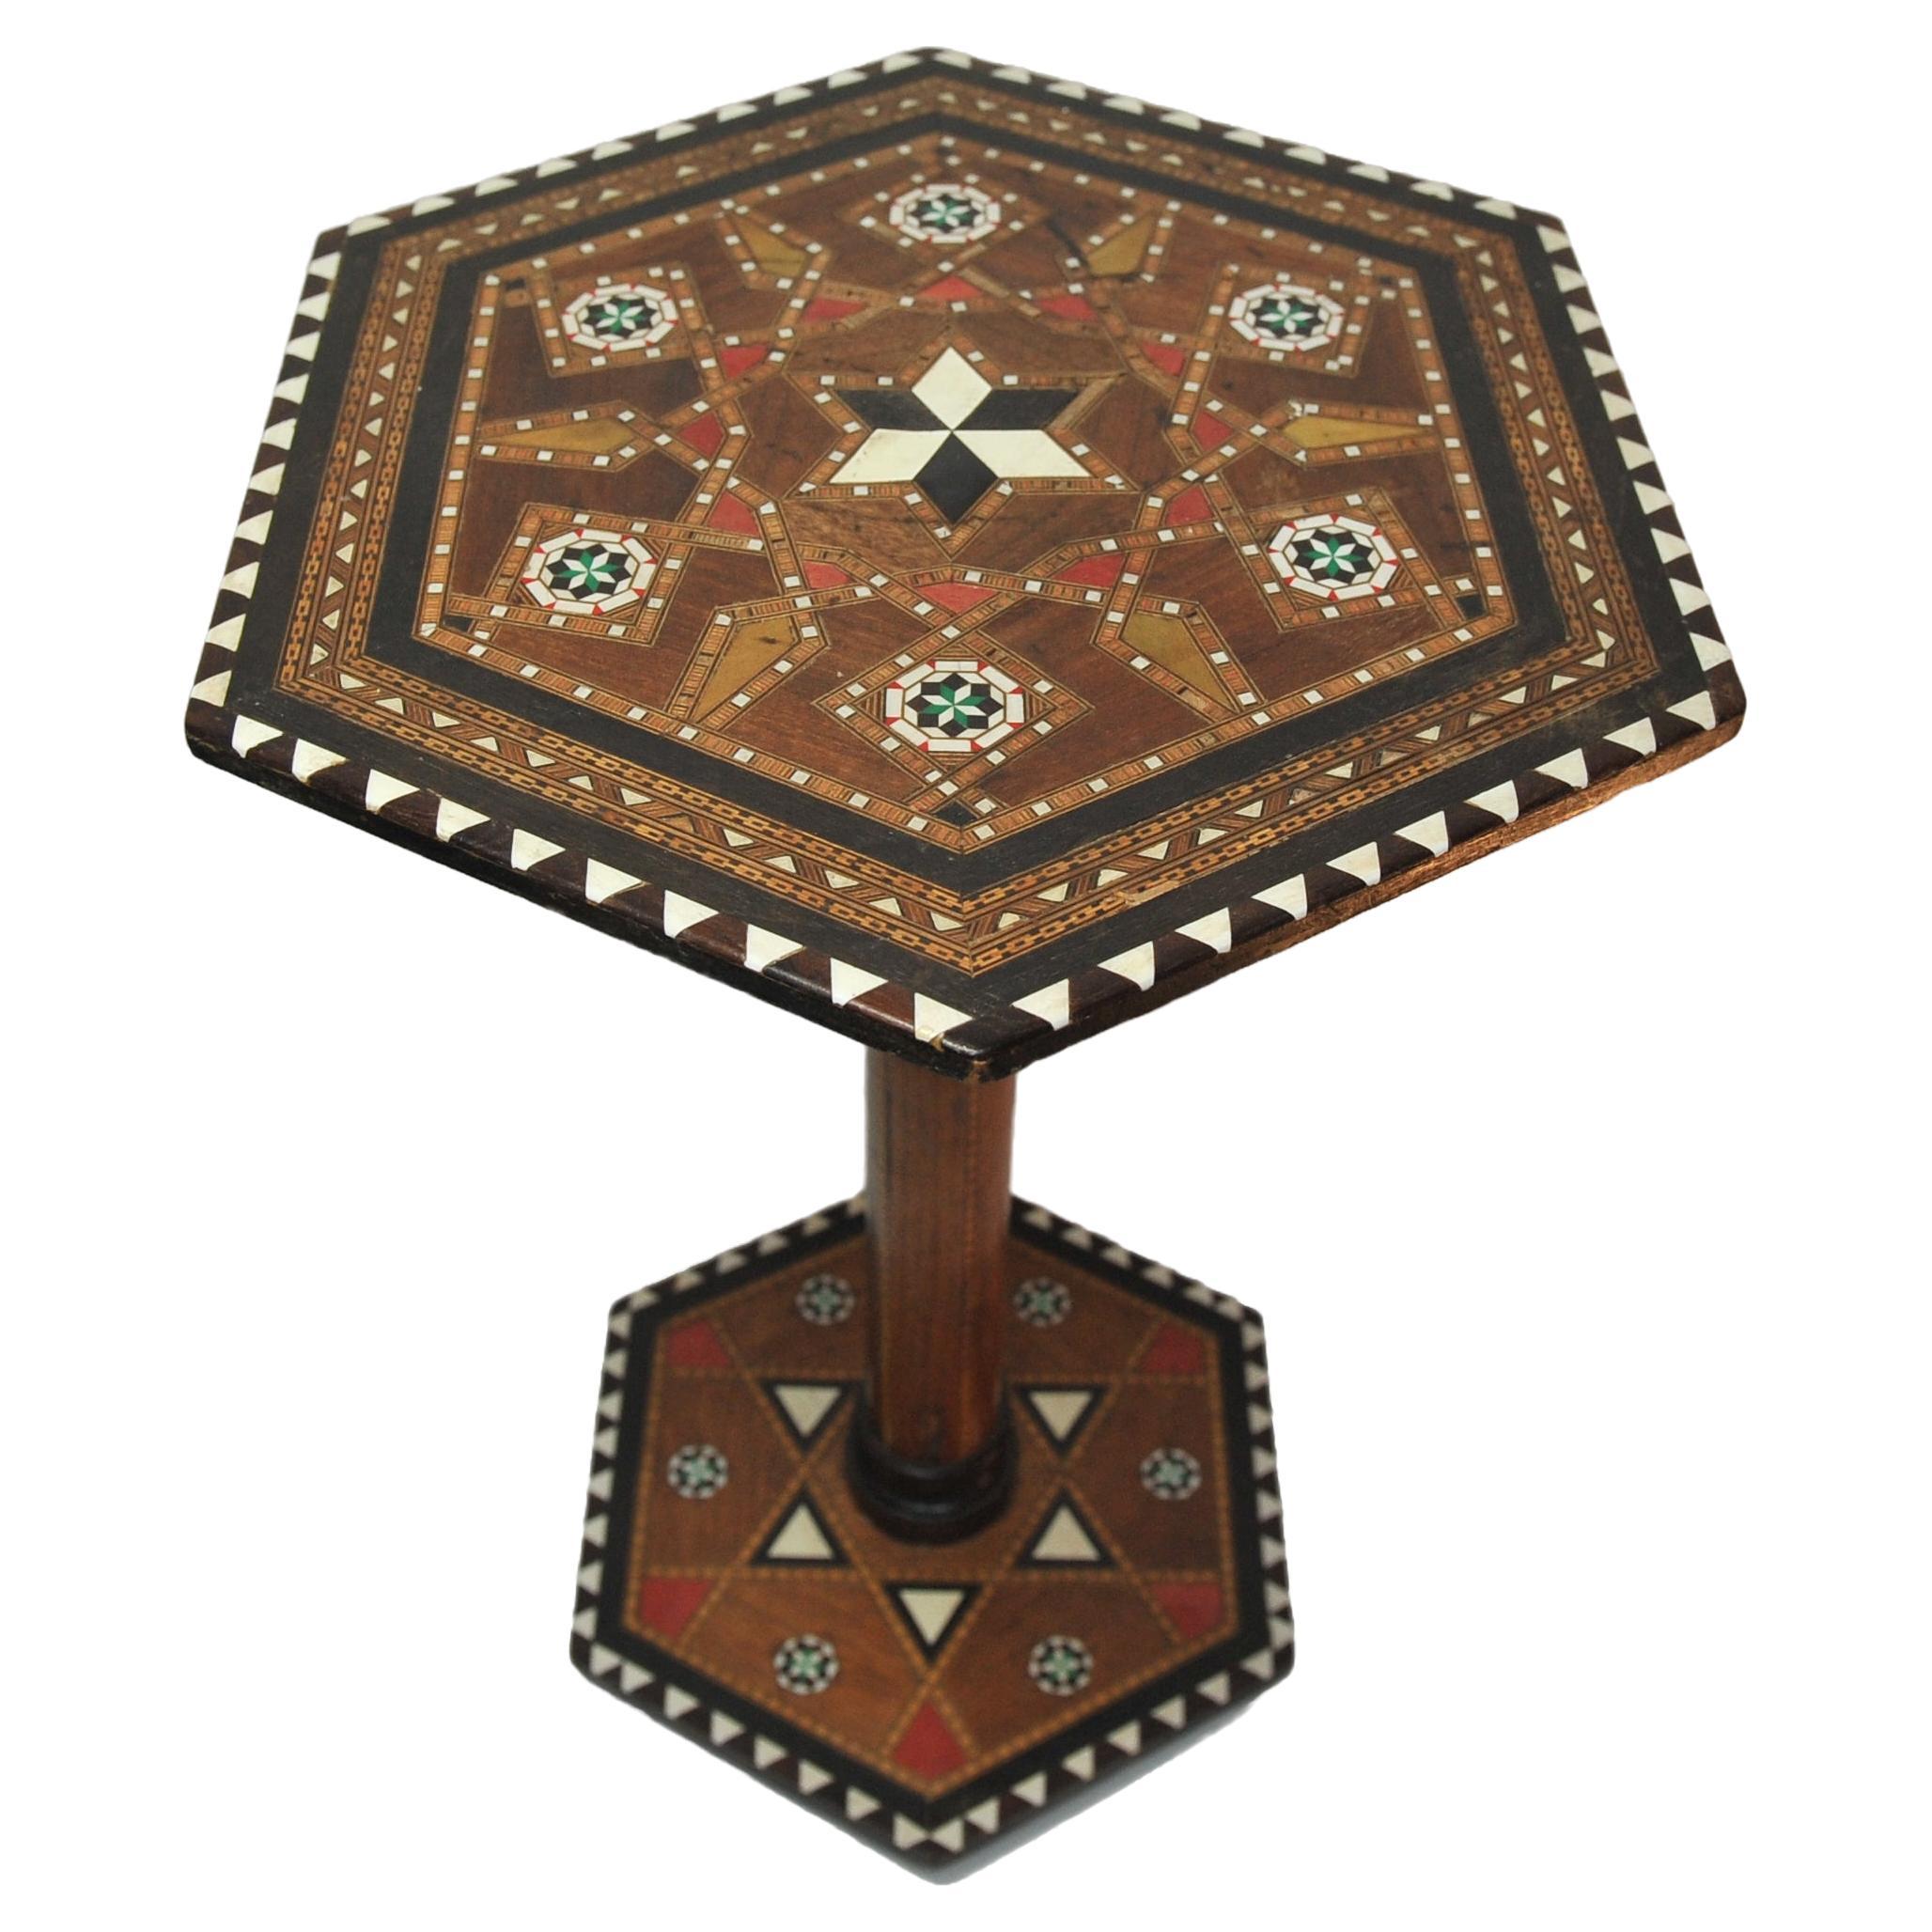 A 19th Century Hexagonal Moorish Fruitwood Tea Table With Mosaic Detailing  In Good Condition For Sale In High Wycombe, GB